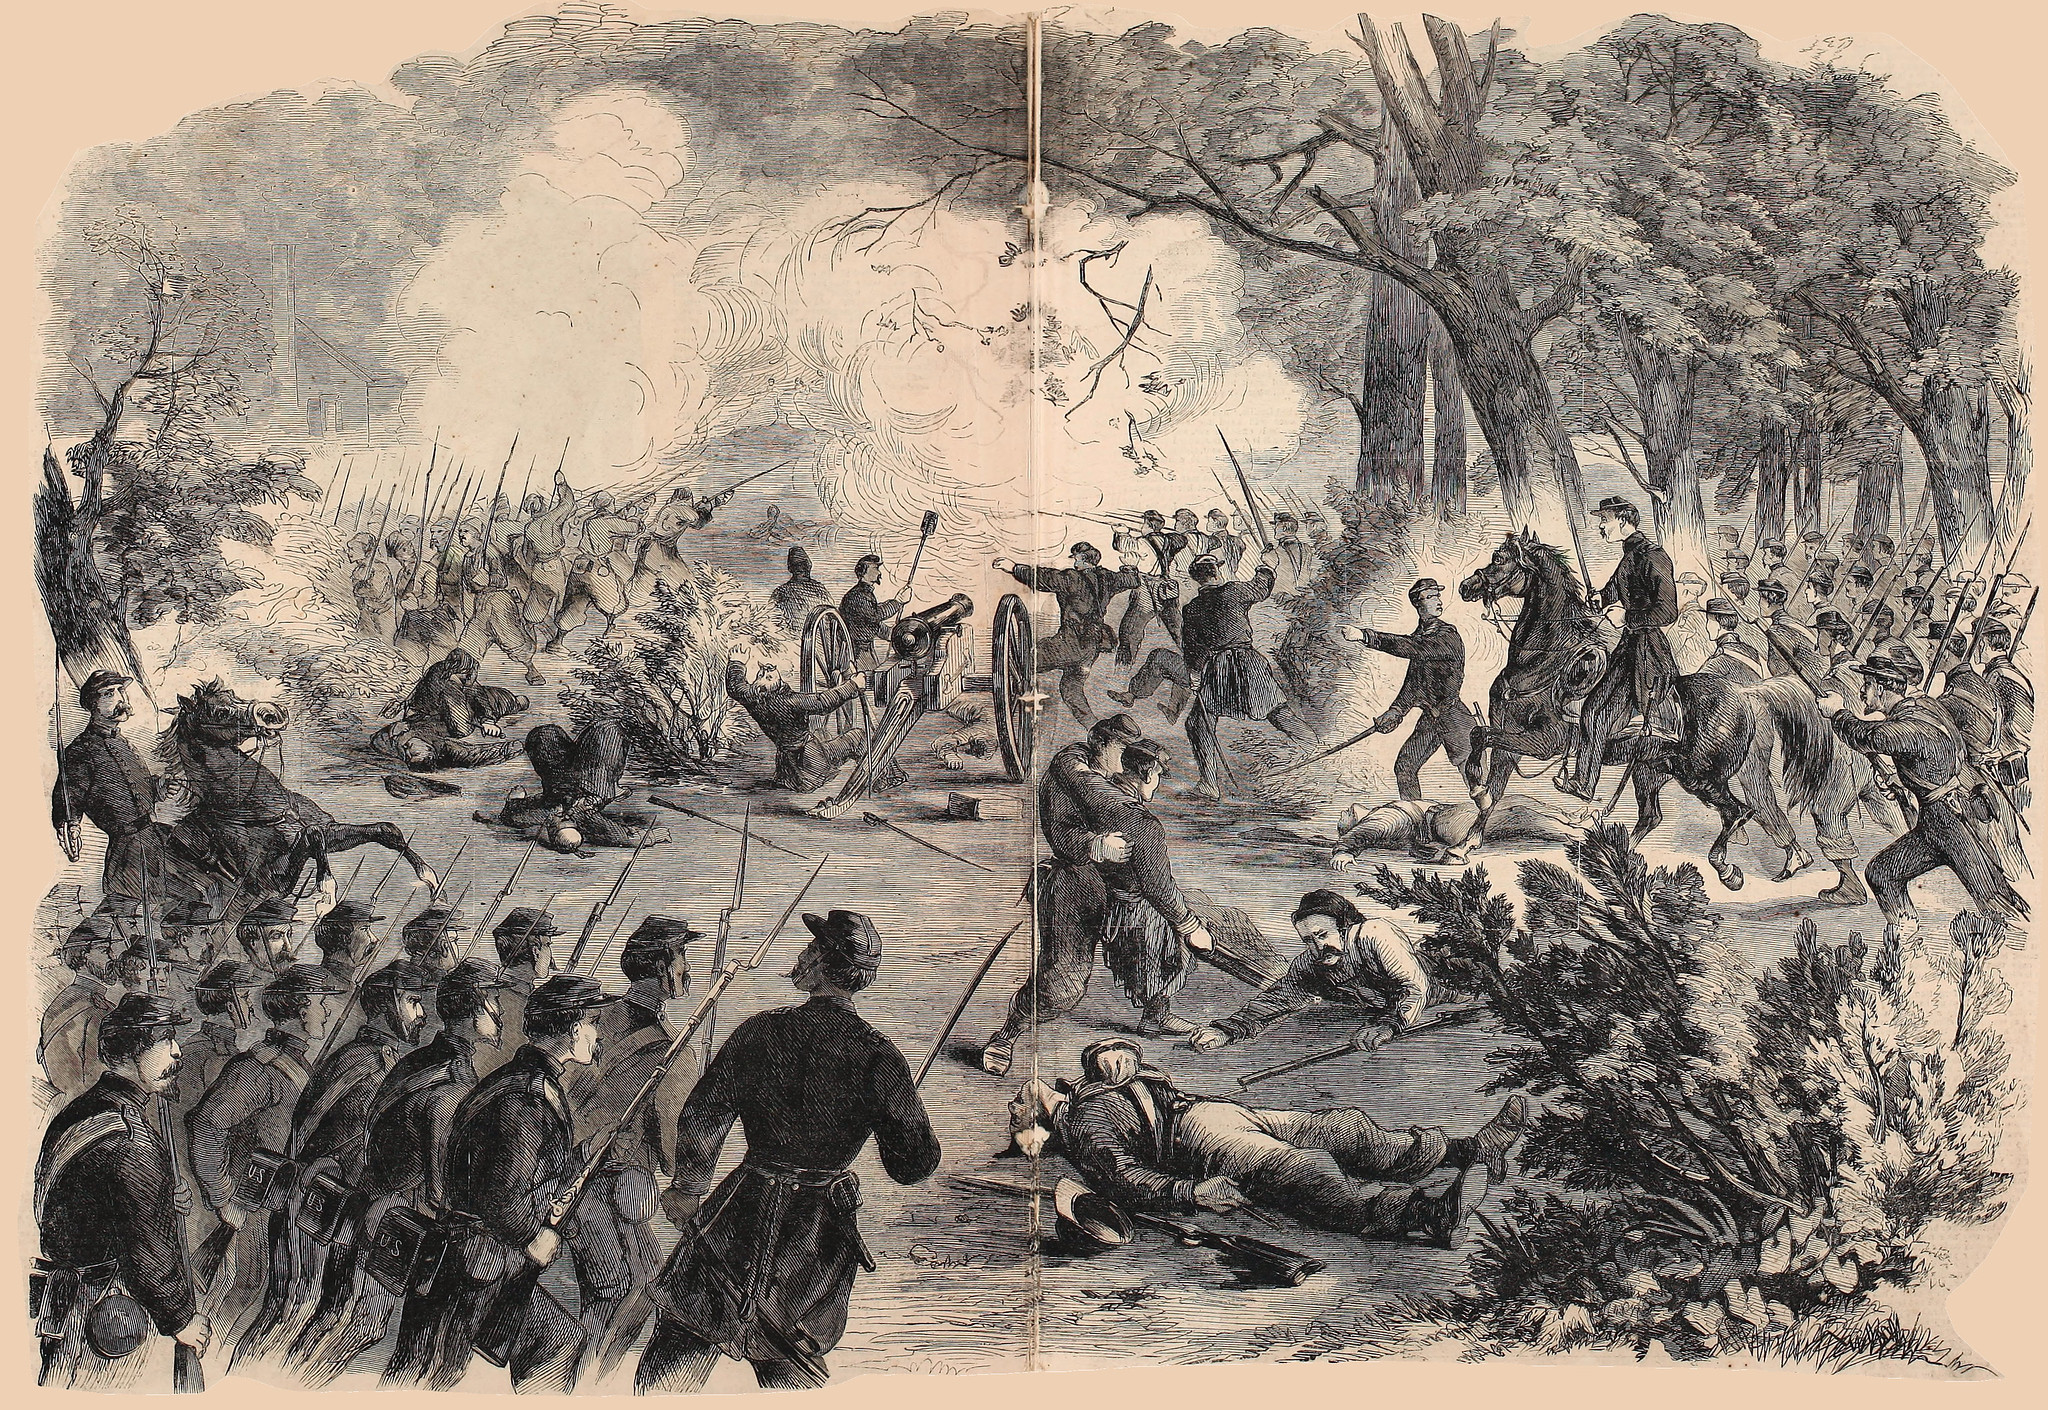 The Battle at Great Bethel, Between the Federal Troops Under the Command of General Pierce, Consisting of Duryea's Zouave Regiment, Townsend's Albany Regiment, Bendix's Steuben Regiment, Allen's First New York Volunteer Regiment and the Secession Troops, Strongly Entrenched, Under the Command of Colonel J. B. Magruder, on the Morning of June 10, 1861